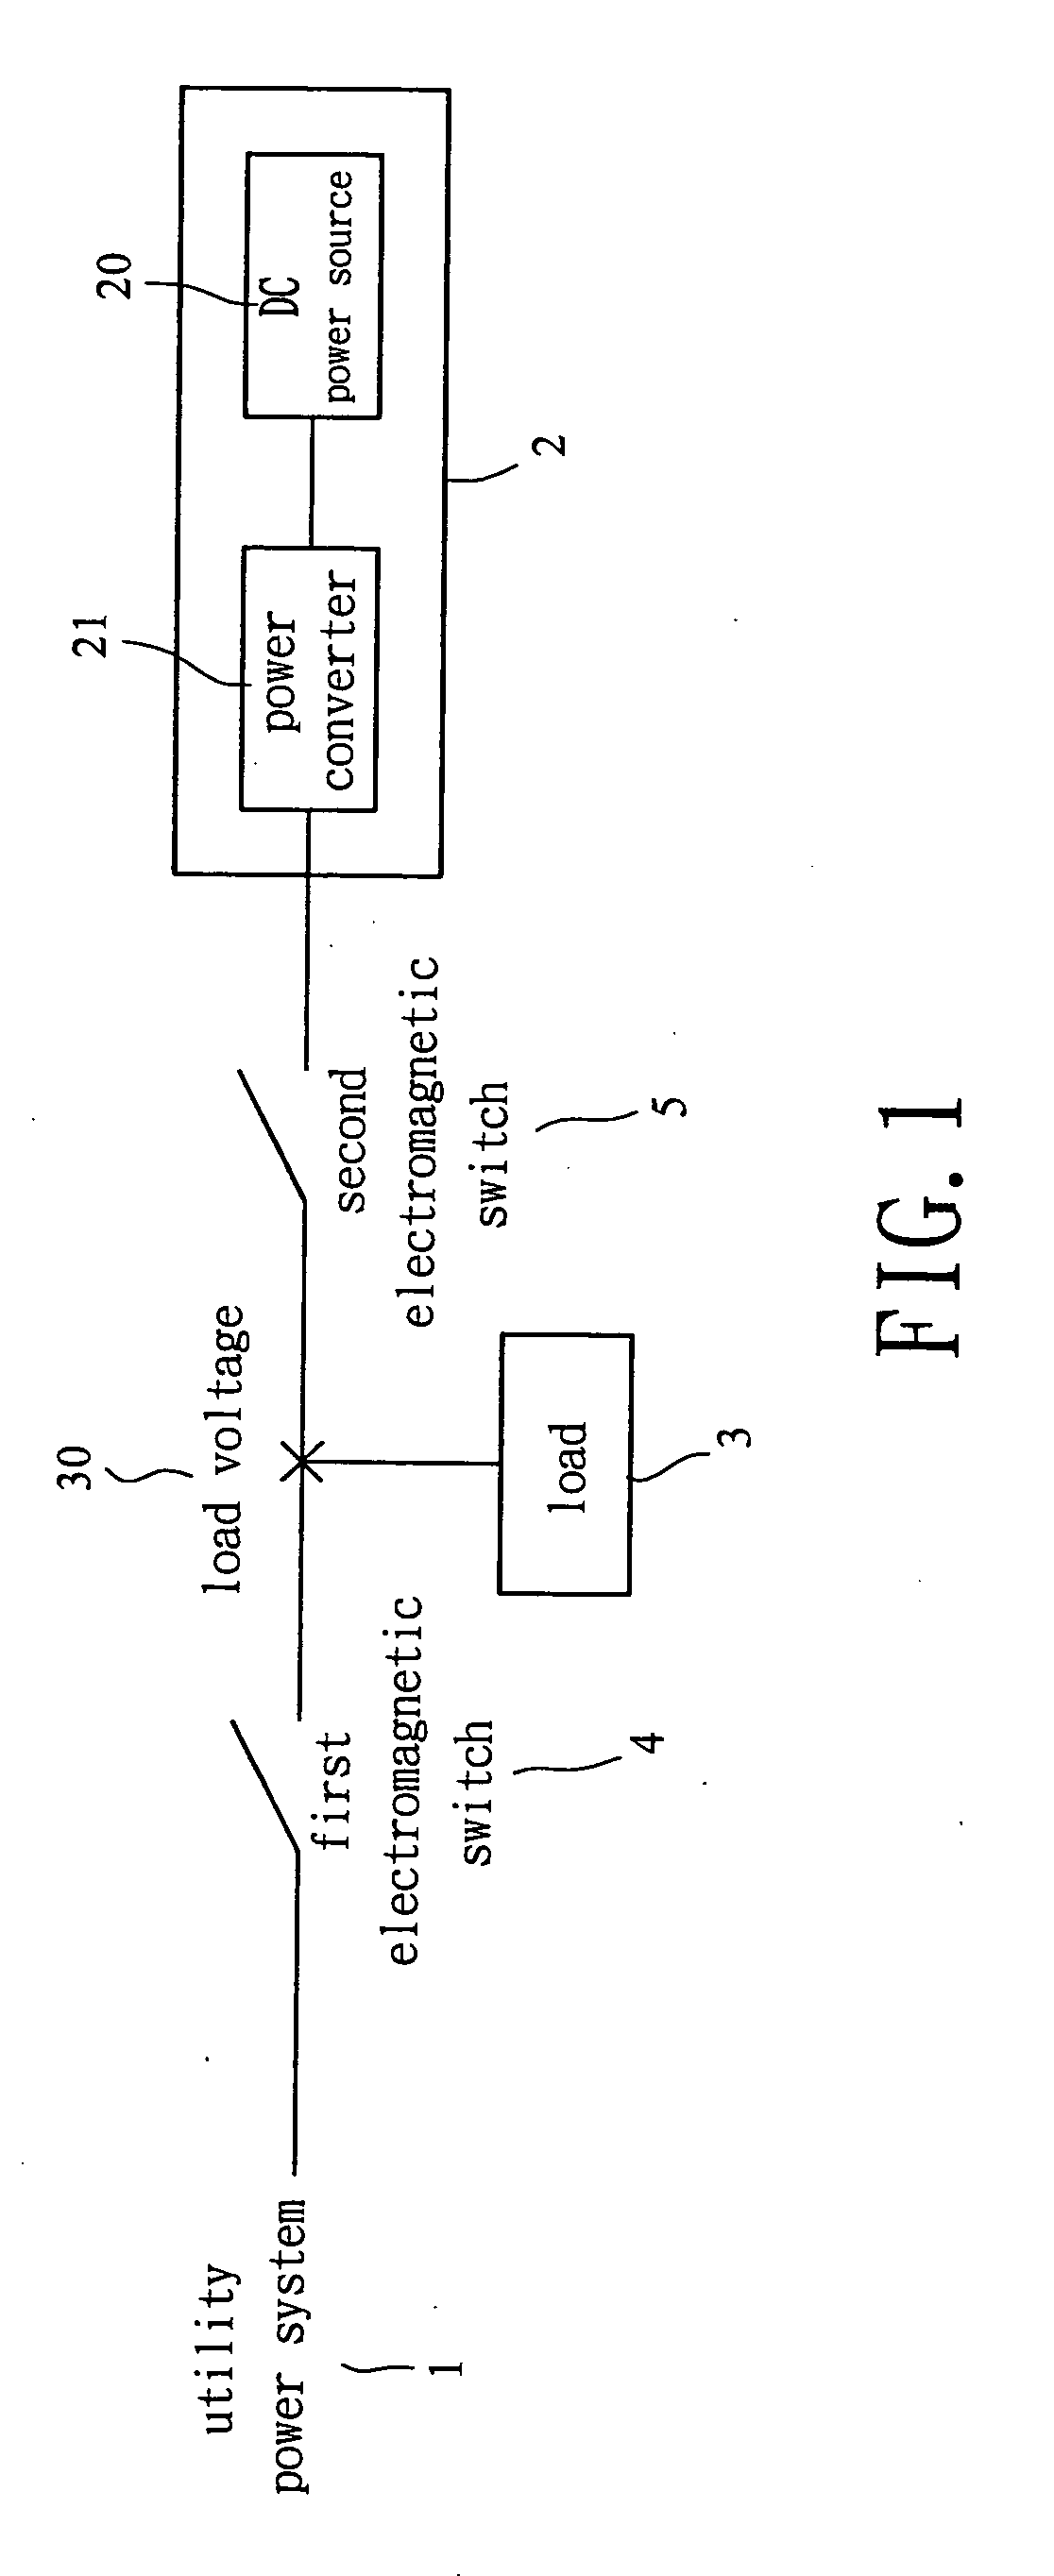 Islanding detection apparatus for a distributed generation power system and detection method therefor